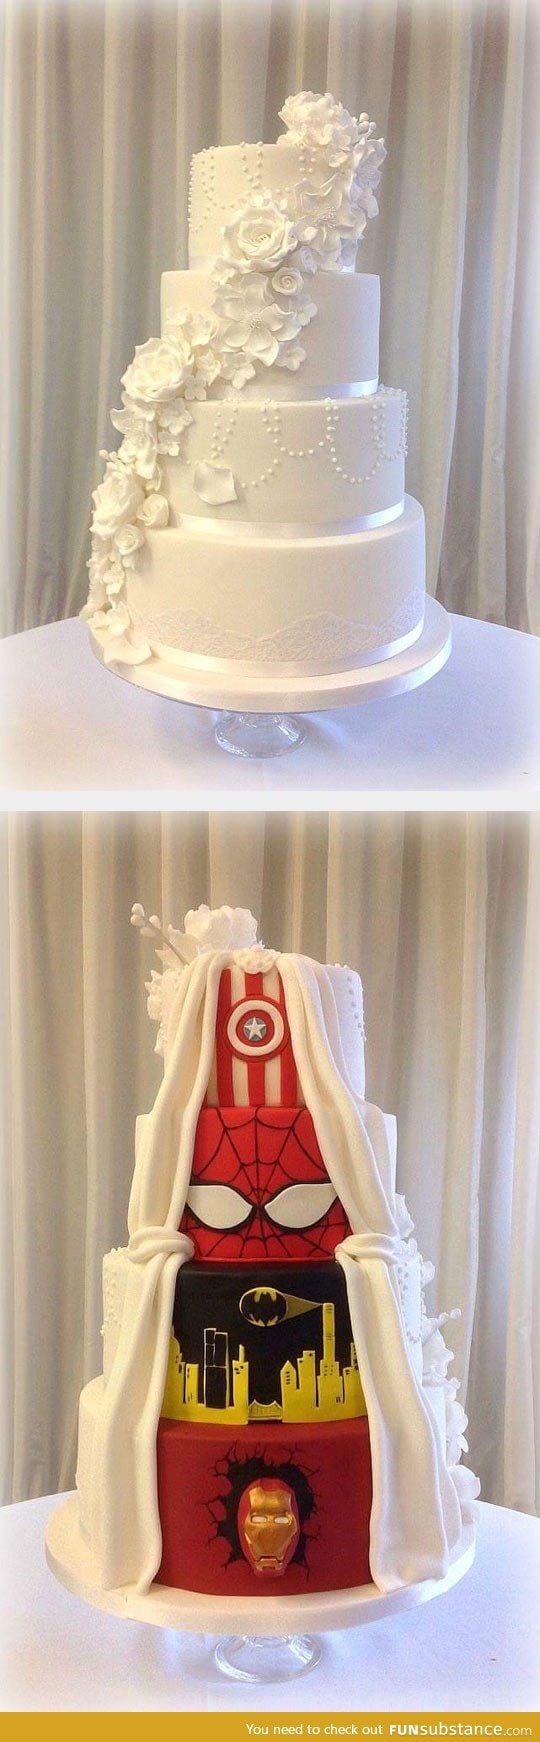 Two in one wedding cake